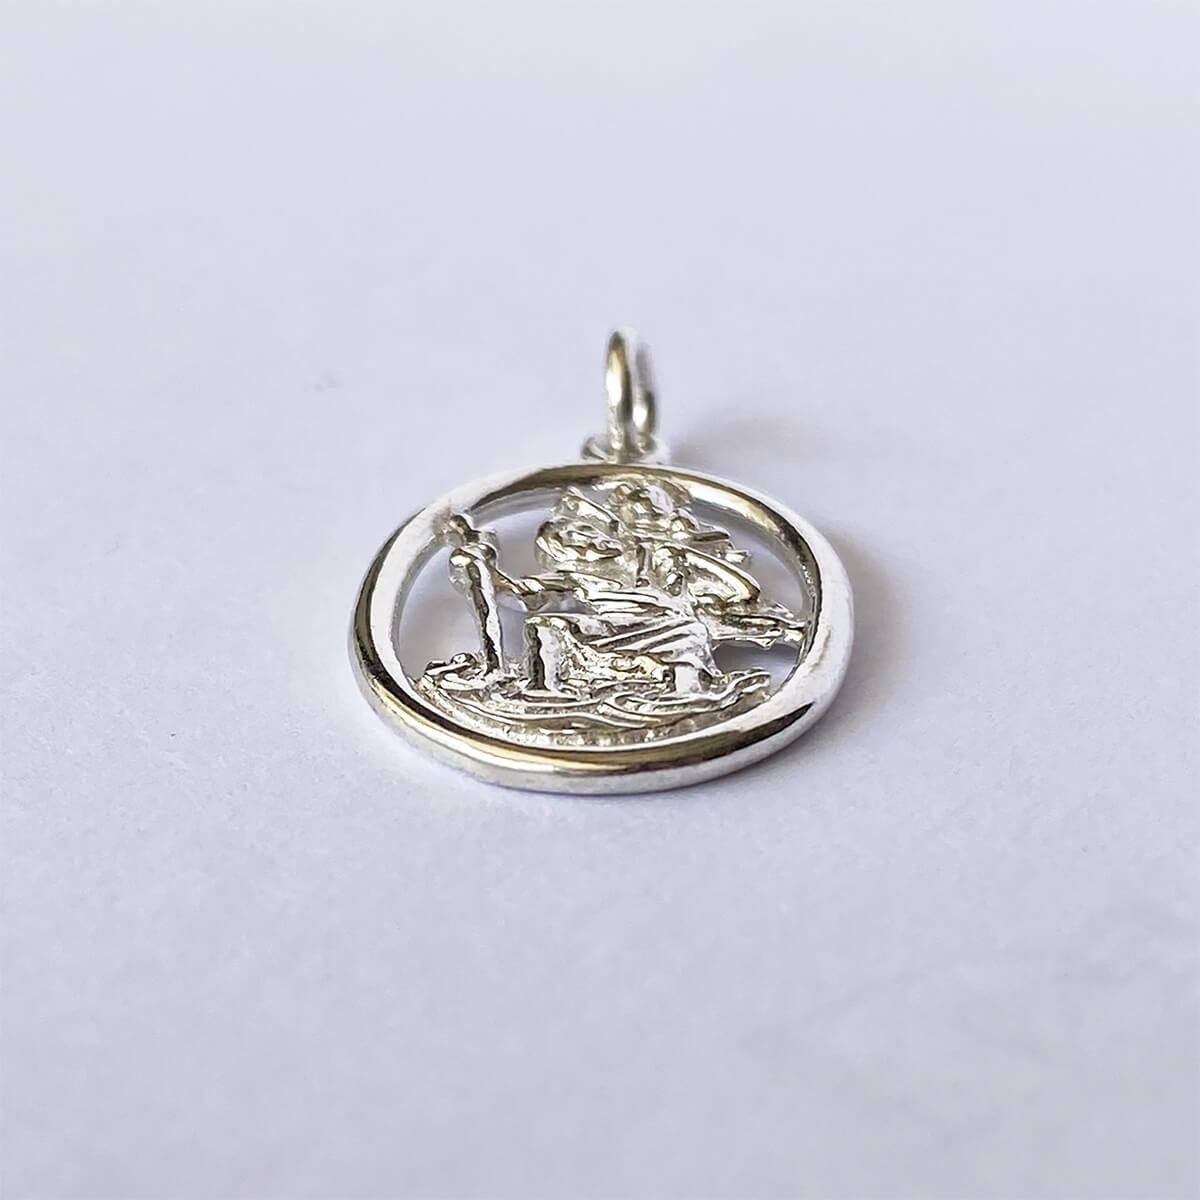 Saint Christopher Protect Us Charm Sterling Silver Religion Pendant from Charmarama